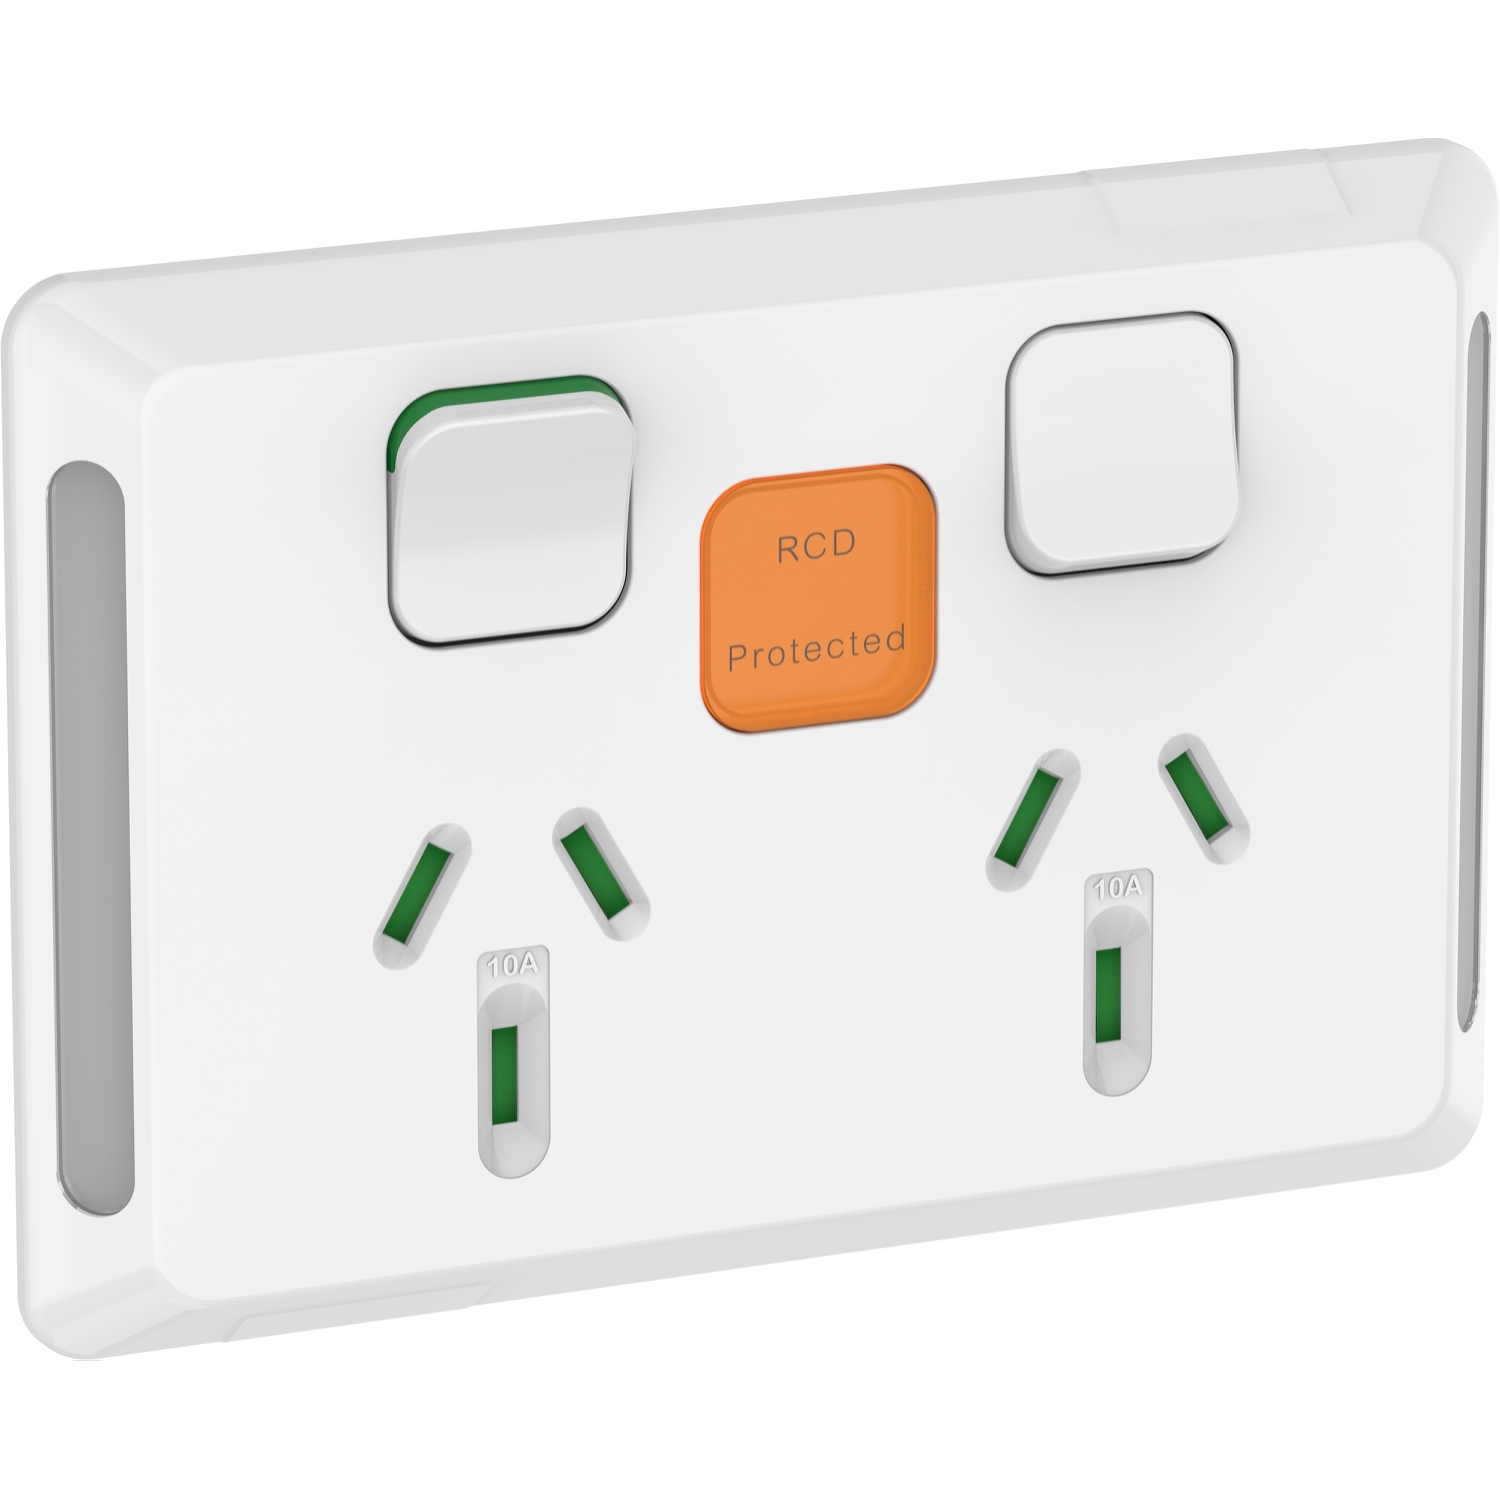 PDL Pro Series - Double Switched Socket RCD Protected 10A - White